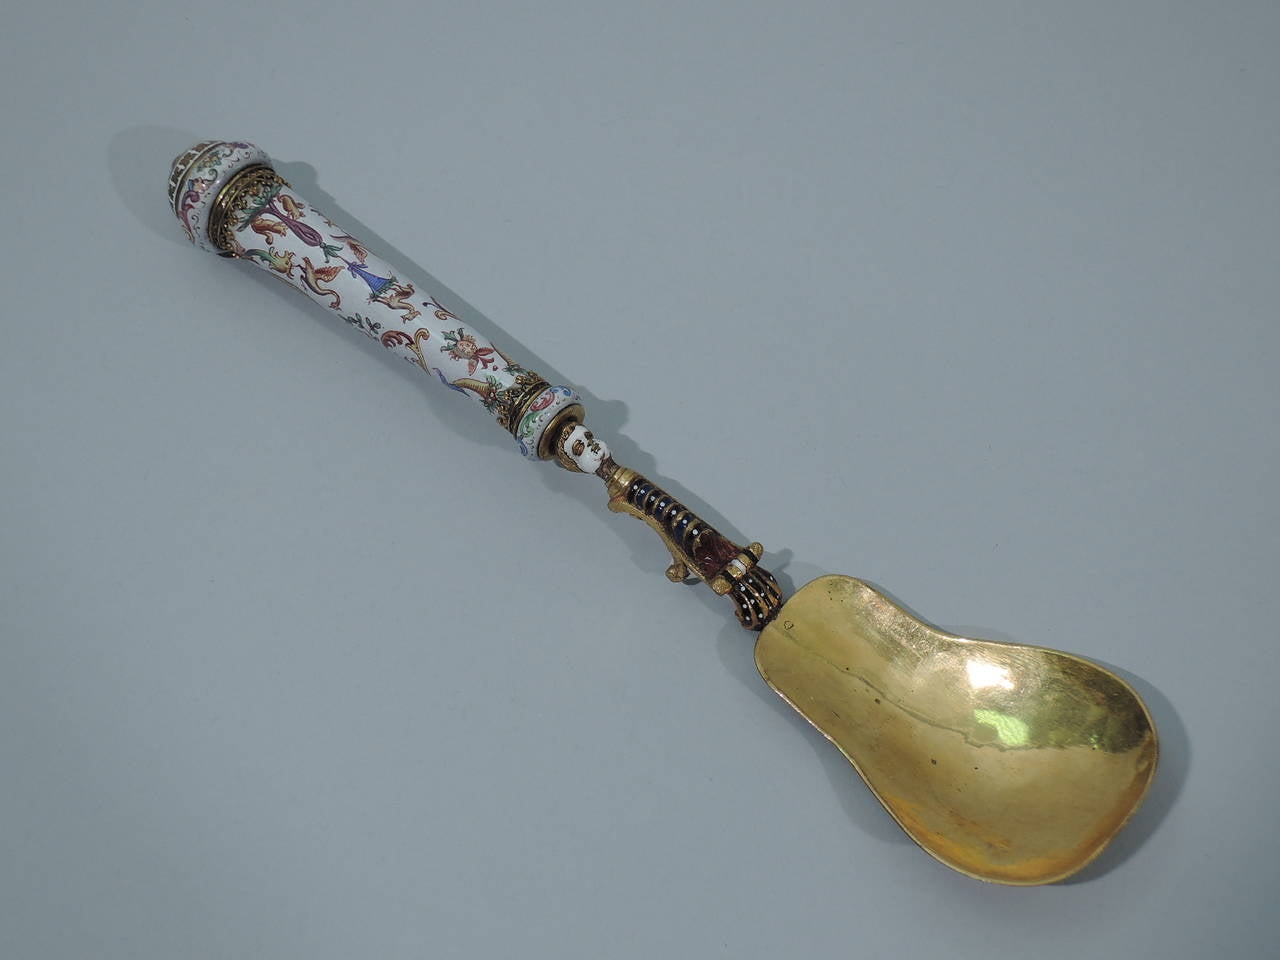 Set of 3 Italian serving pieces in gilt brass and enamel, ca. 1860. This set comprises a spoon, fork, and knife. The handles are straight and tapering with knops and enameled Grotesque ornament on white ground. The spoon has a shaped bowl. The fork